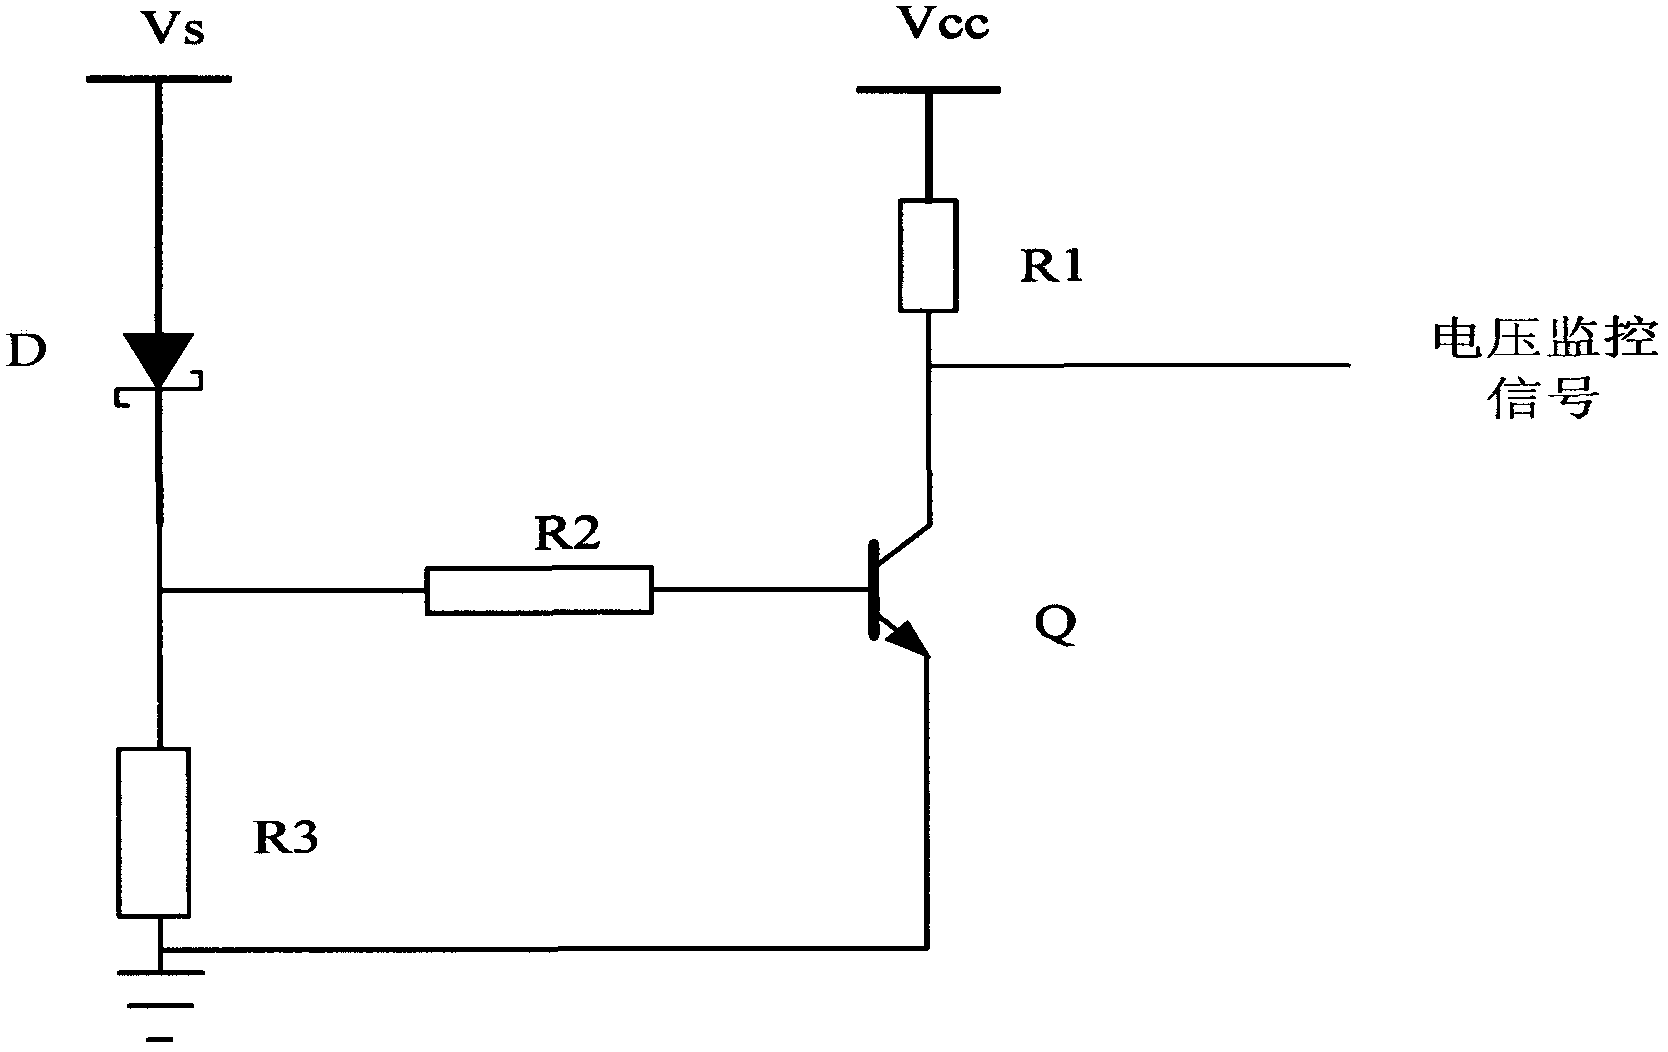 The power-on control circuit of the airborne laser photometer